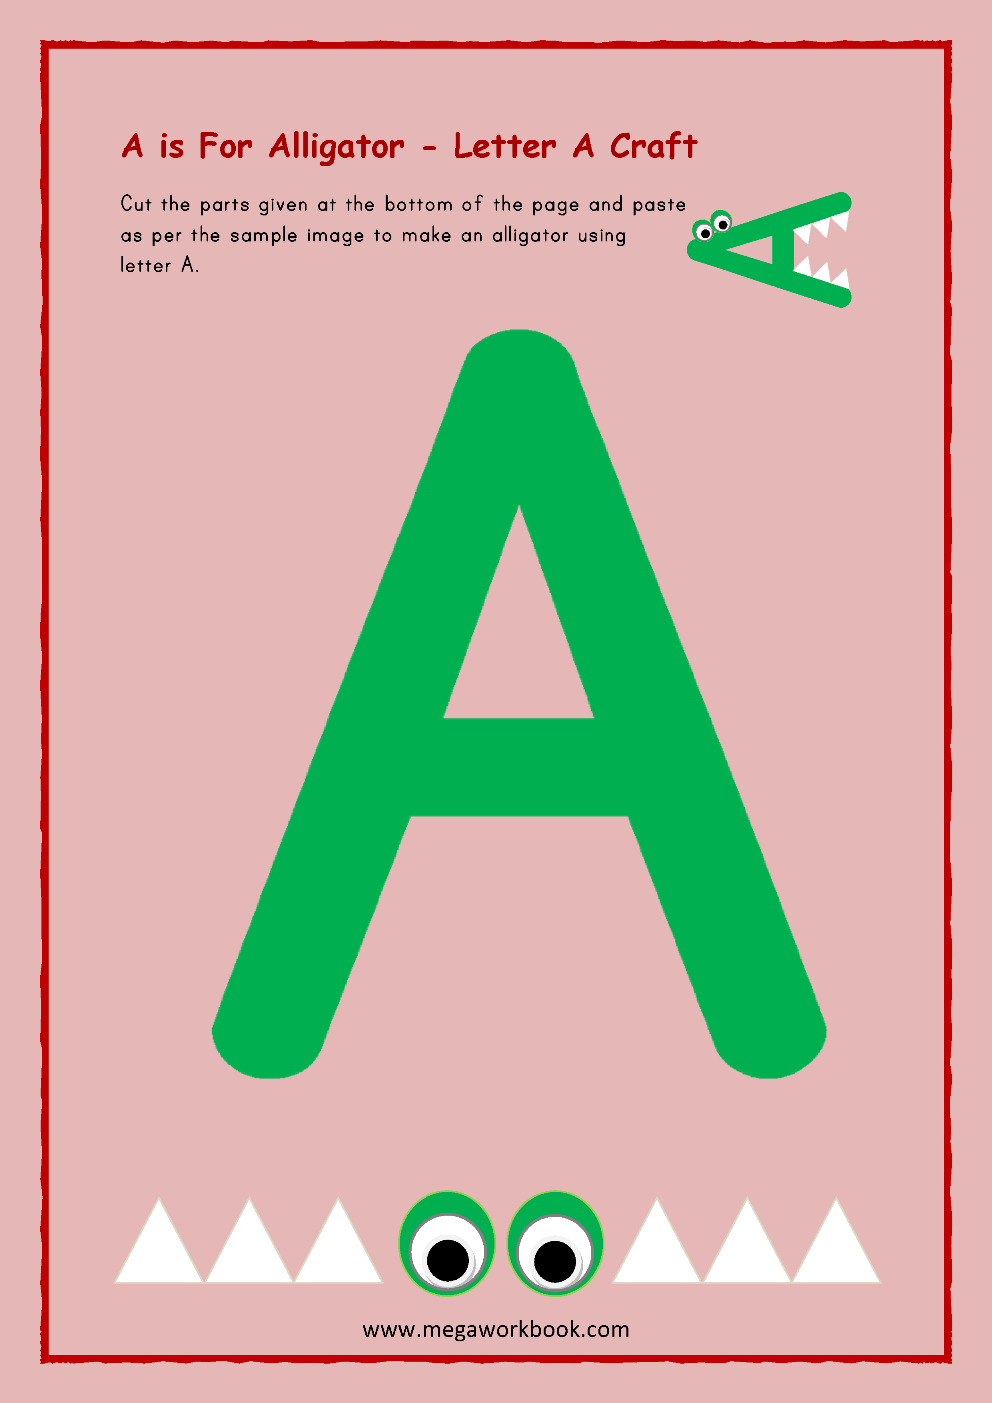 Letter A Activities Letter A Worksheets Letter A Activity Letter C Words And Pictures 